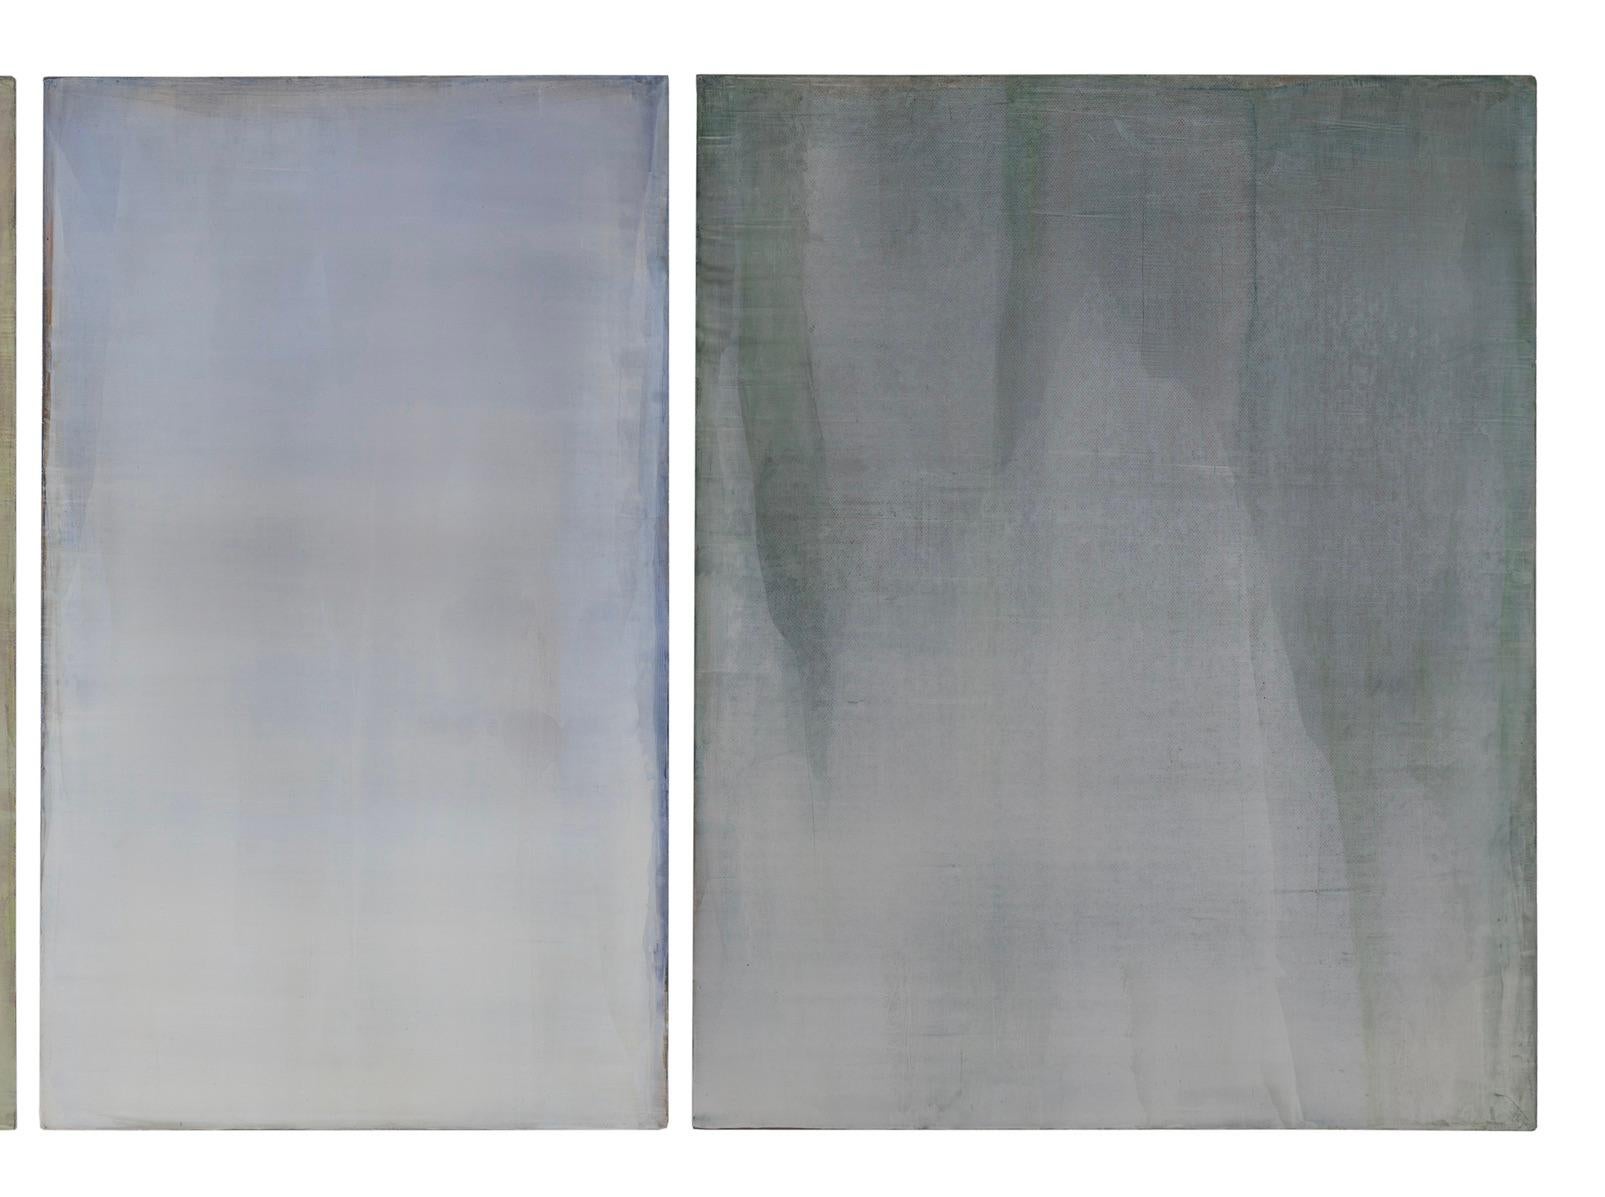 Paul Shakespear’s minimalist works constantly explore the material properties of paint. This triptych is beautifully surfaced.
The artist strives to achieve translucence, depth or even a stony surface. The work has no narrative. It has some mark